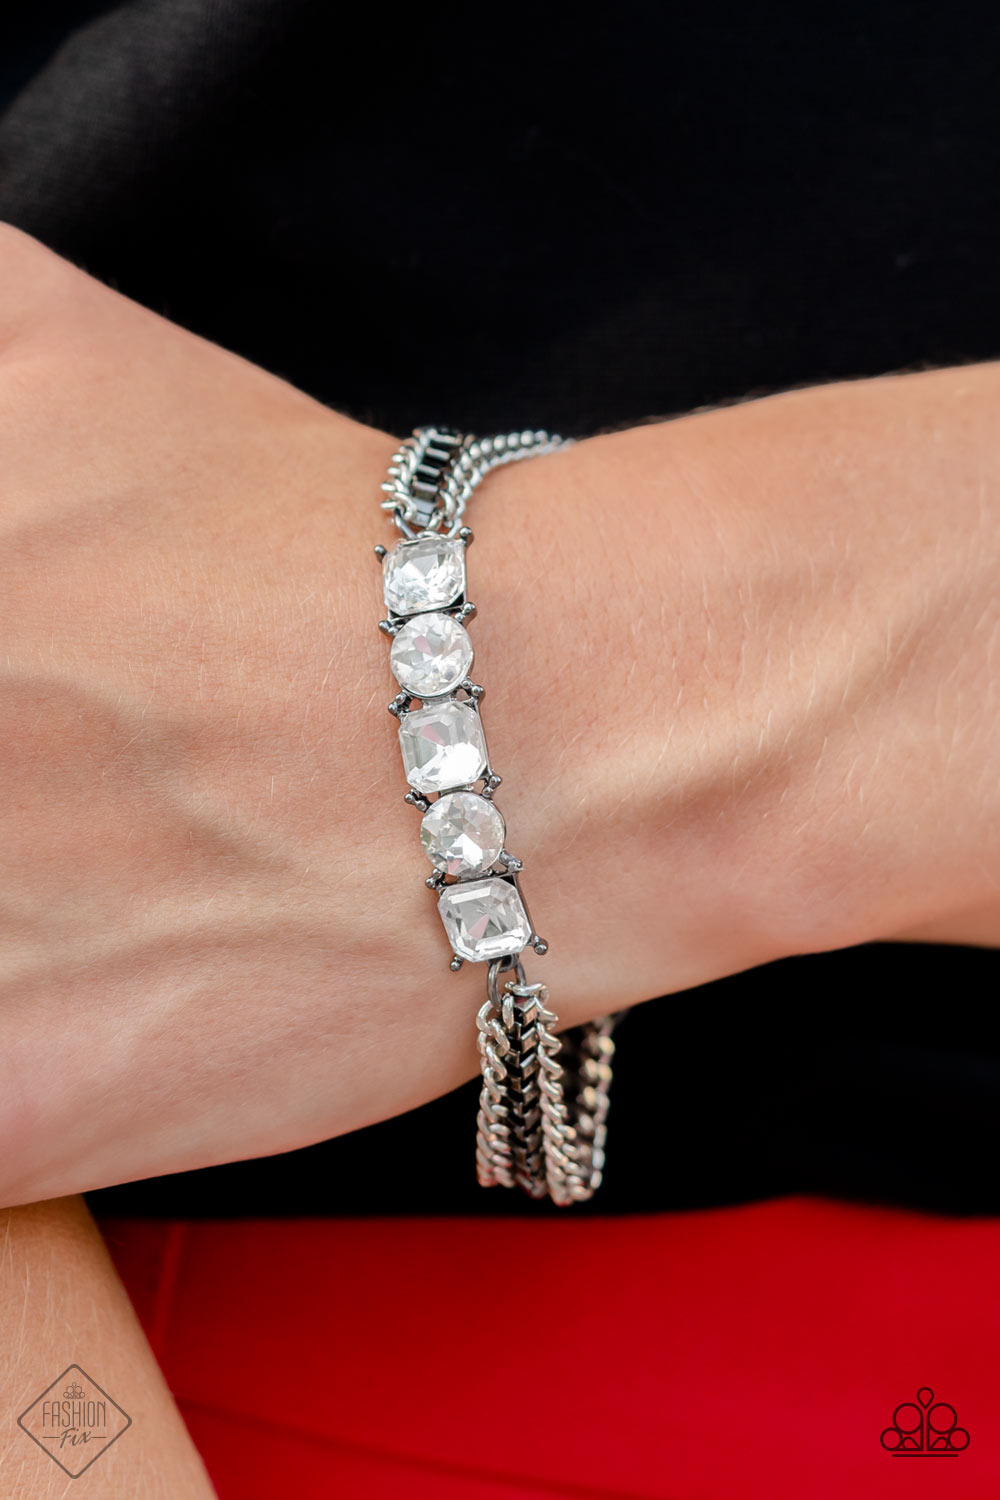 Tyrant Treasure - Black and Silver Chain Bracelet  - Paparazzi Accessories - A gritty mix of classic silver and gunmetal box-chains stem from a row of faceted white gems, pressed into circular and square gunmetal frames, creating edgy layers around the wrist. Features an adjustable clasp closure. Sold as one individual bracelet.